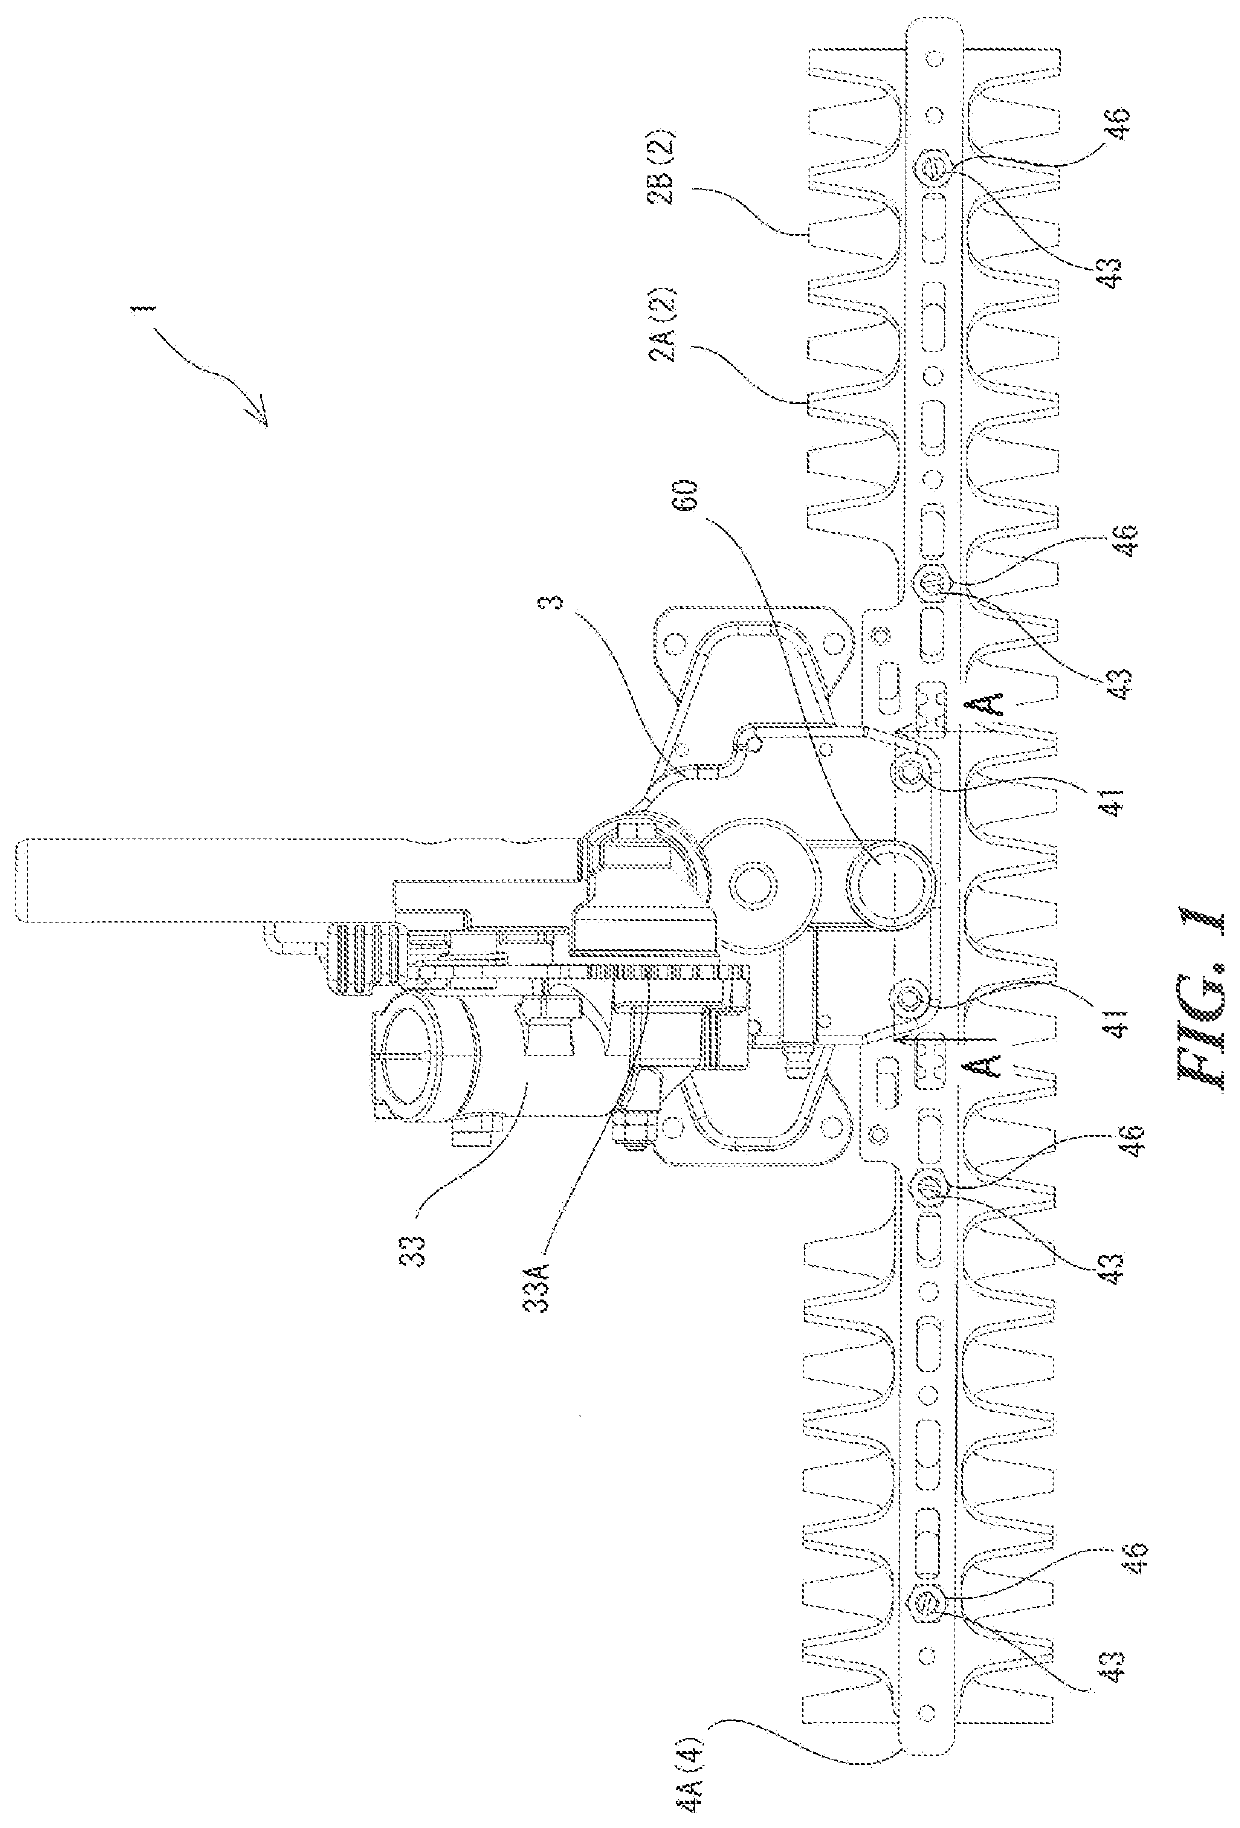 Reciprocating cutting blade apparatus and brush cutter